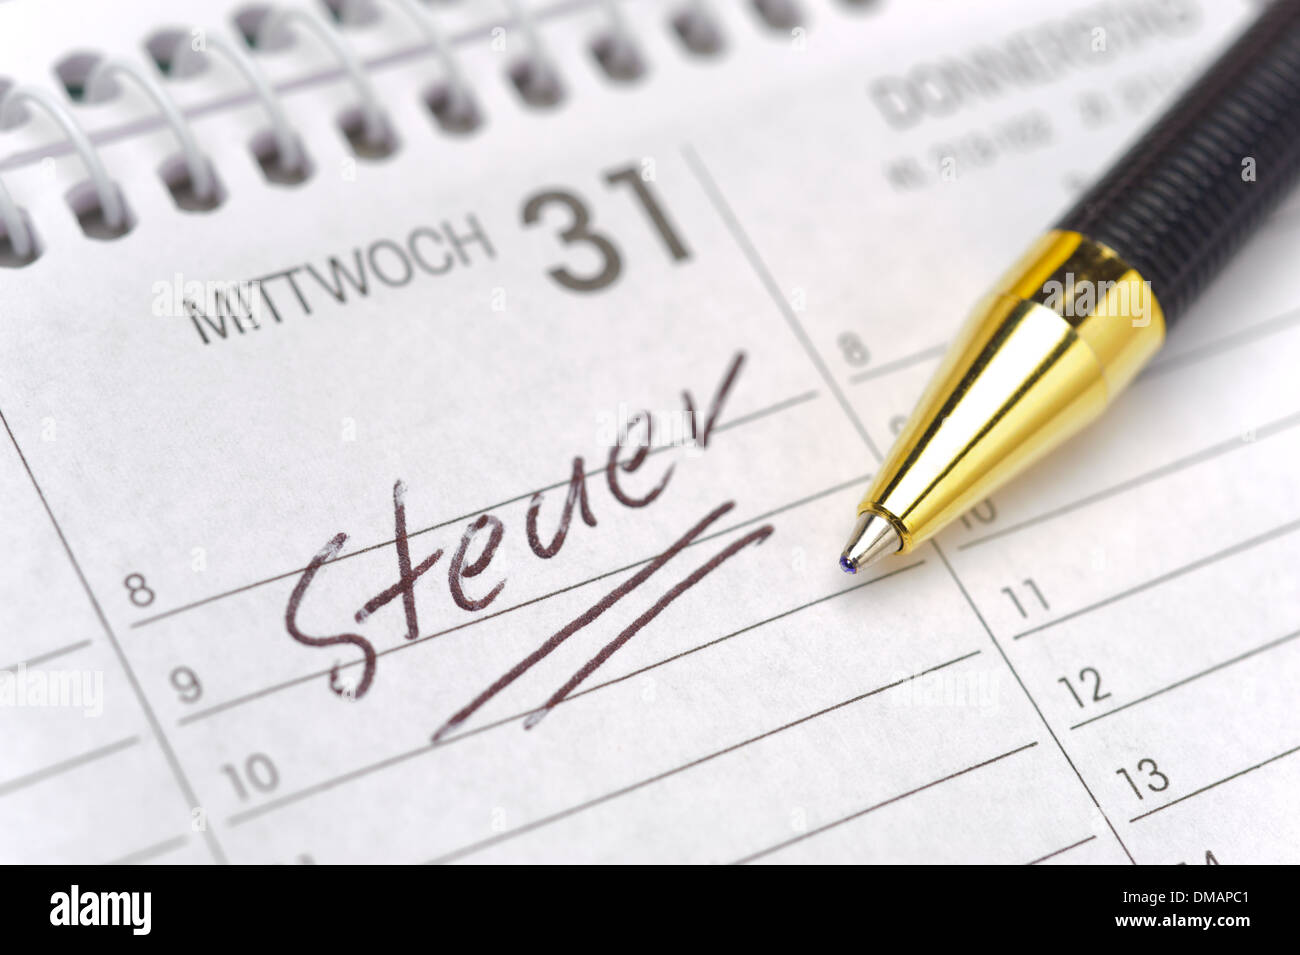 german tax day marked on calendar- tax in german: Steuer Stock Photo